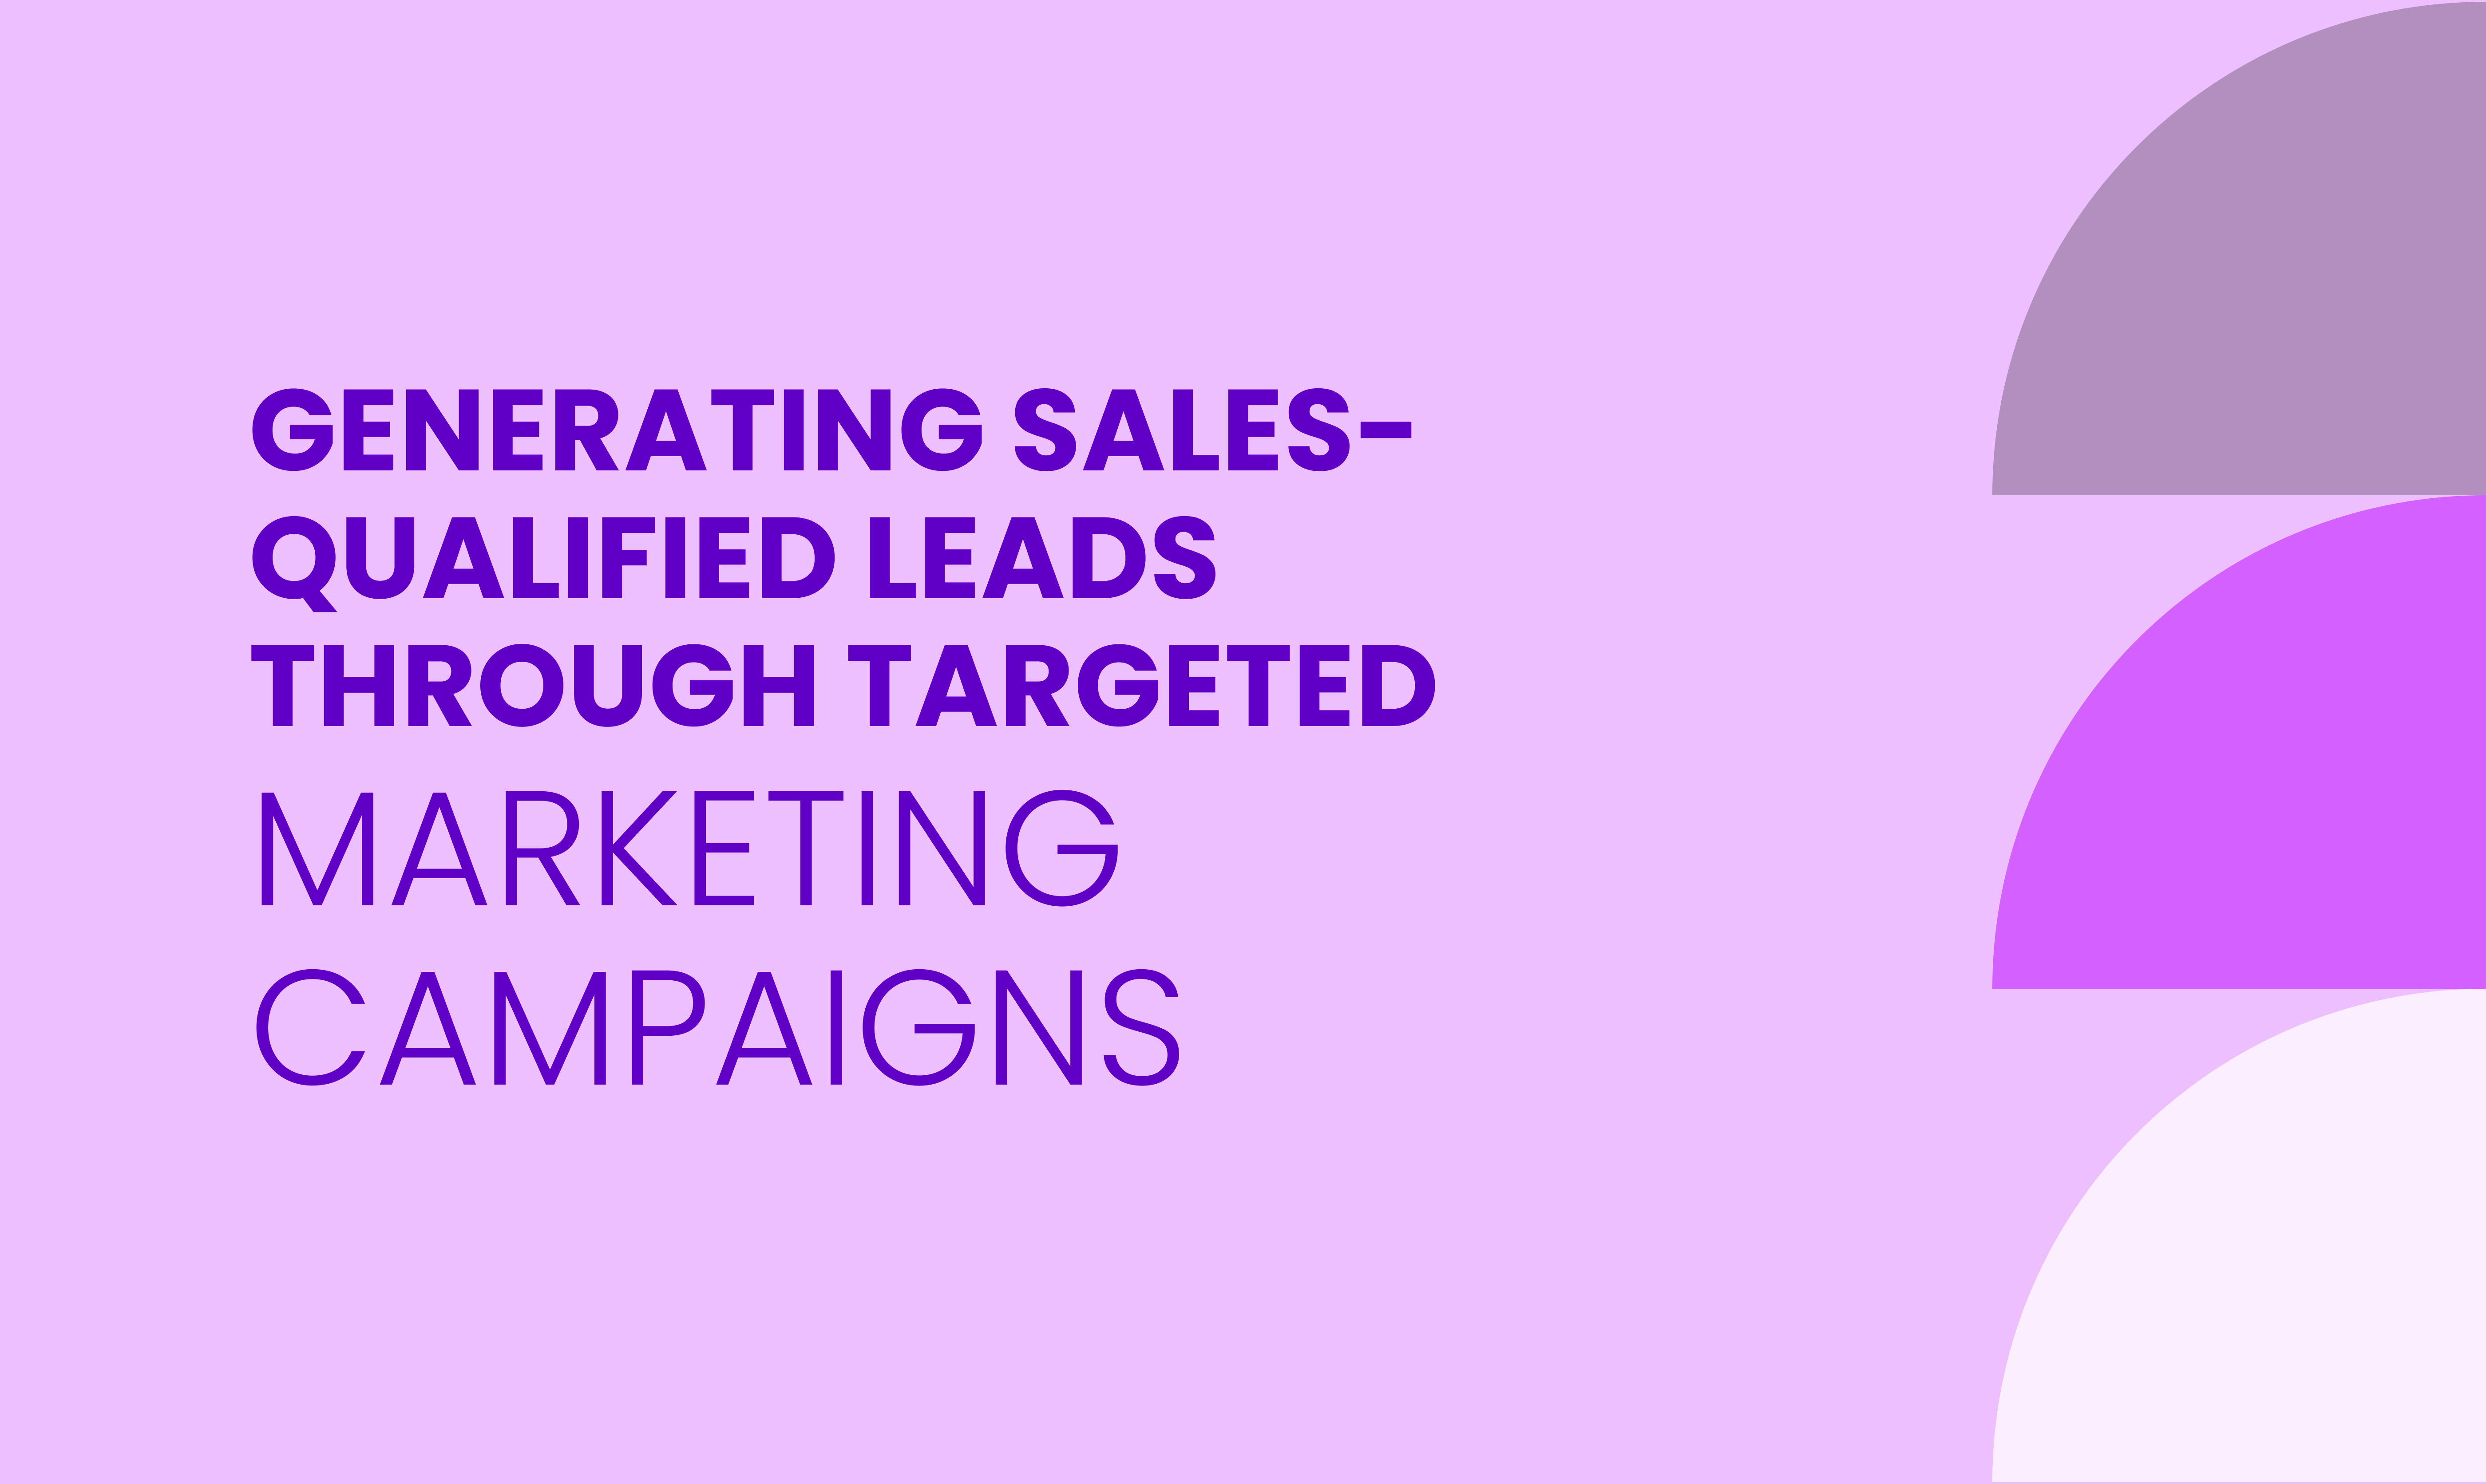 GENERATING SALES-QUALIFIED LEADS THROUGH TARGETED  MARKETING CAMPAIGNS